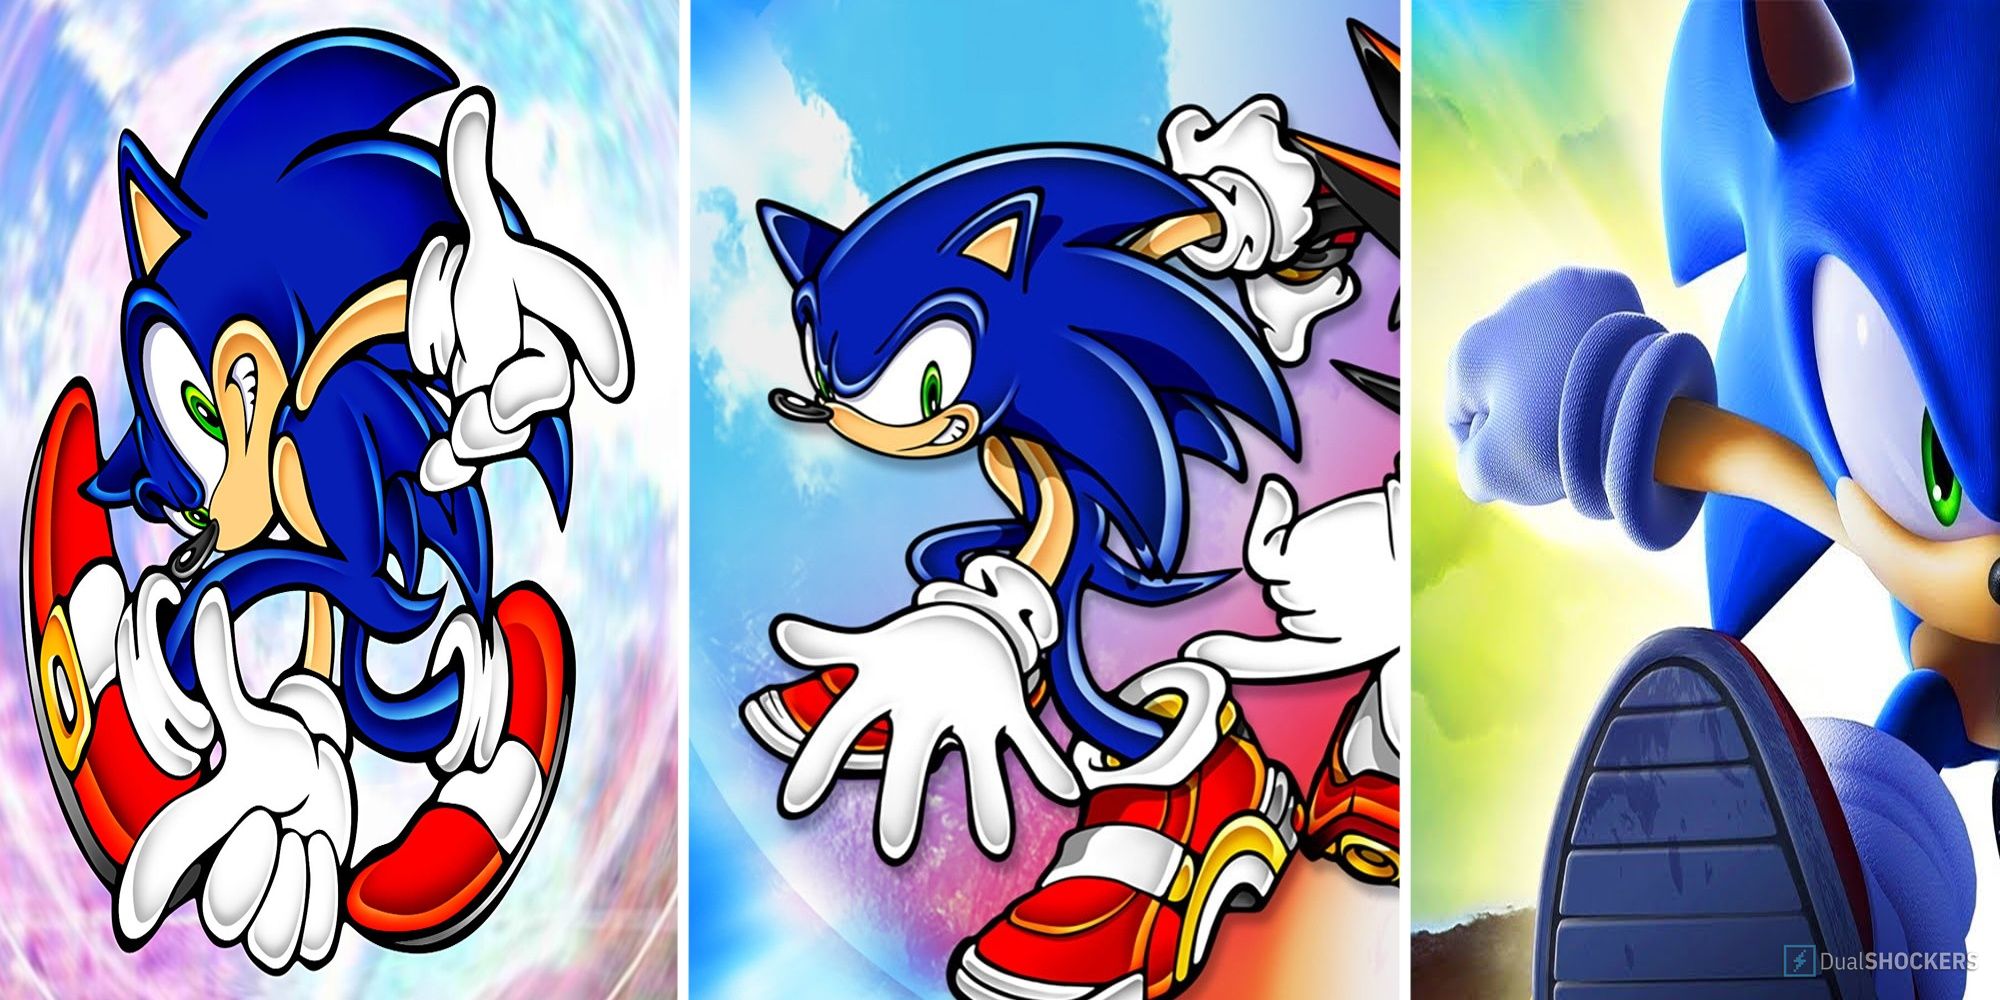 The Cover Games Of Sonic Adventure, Sonic Adventure 2, And Sonic Unleashed